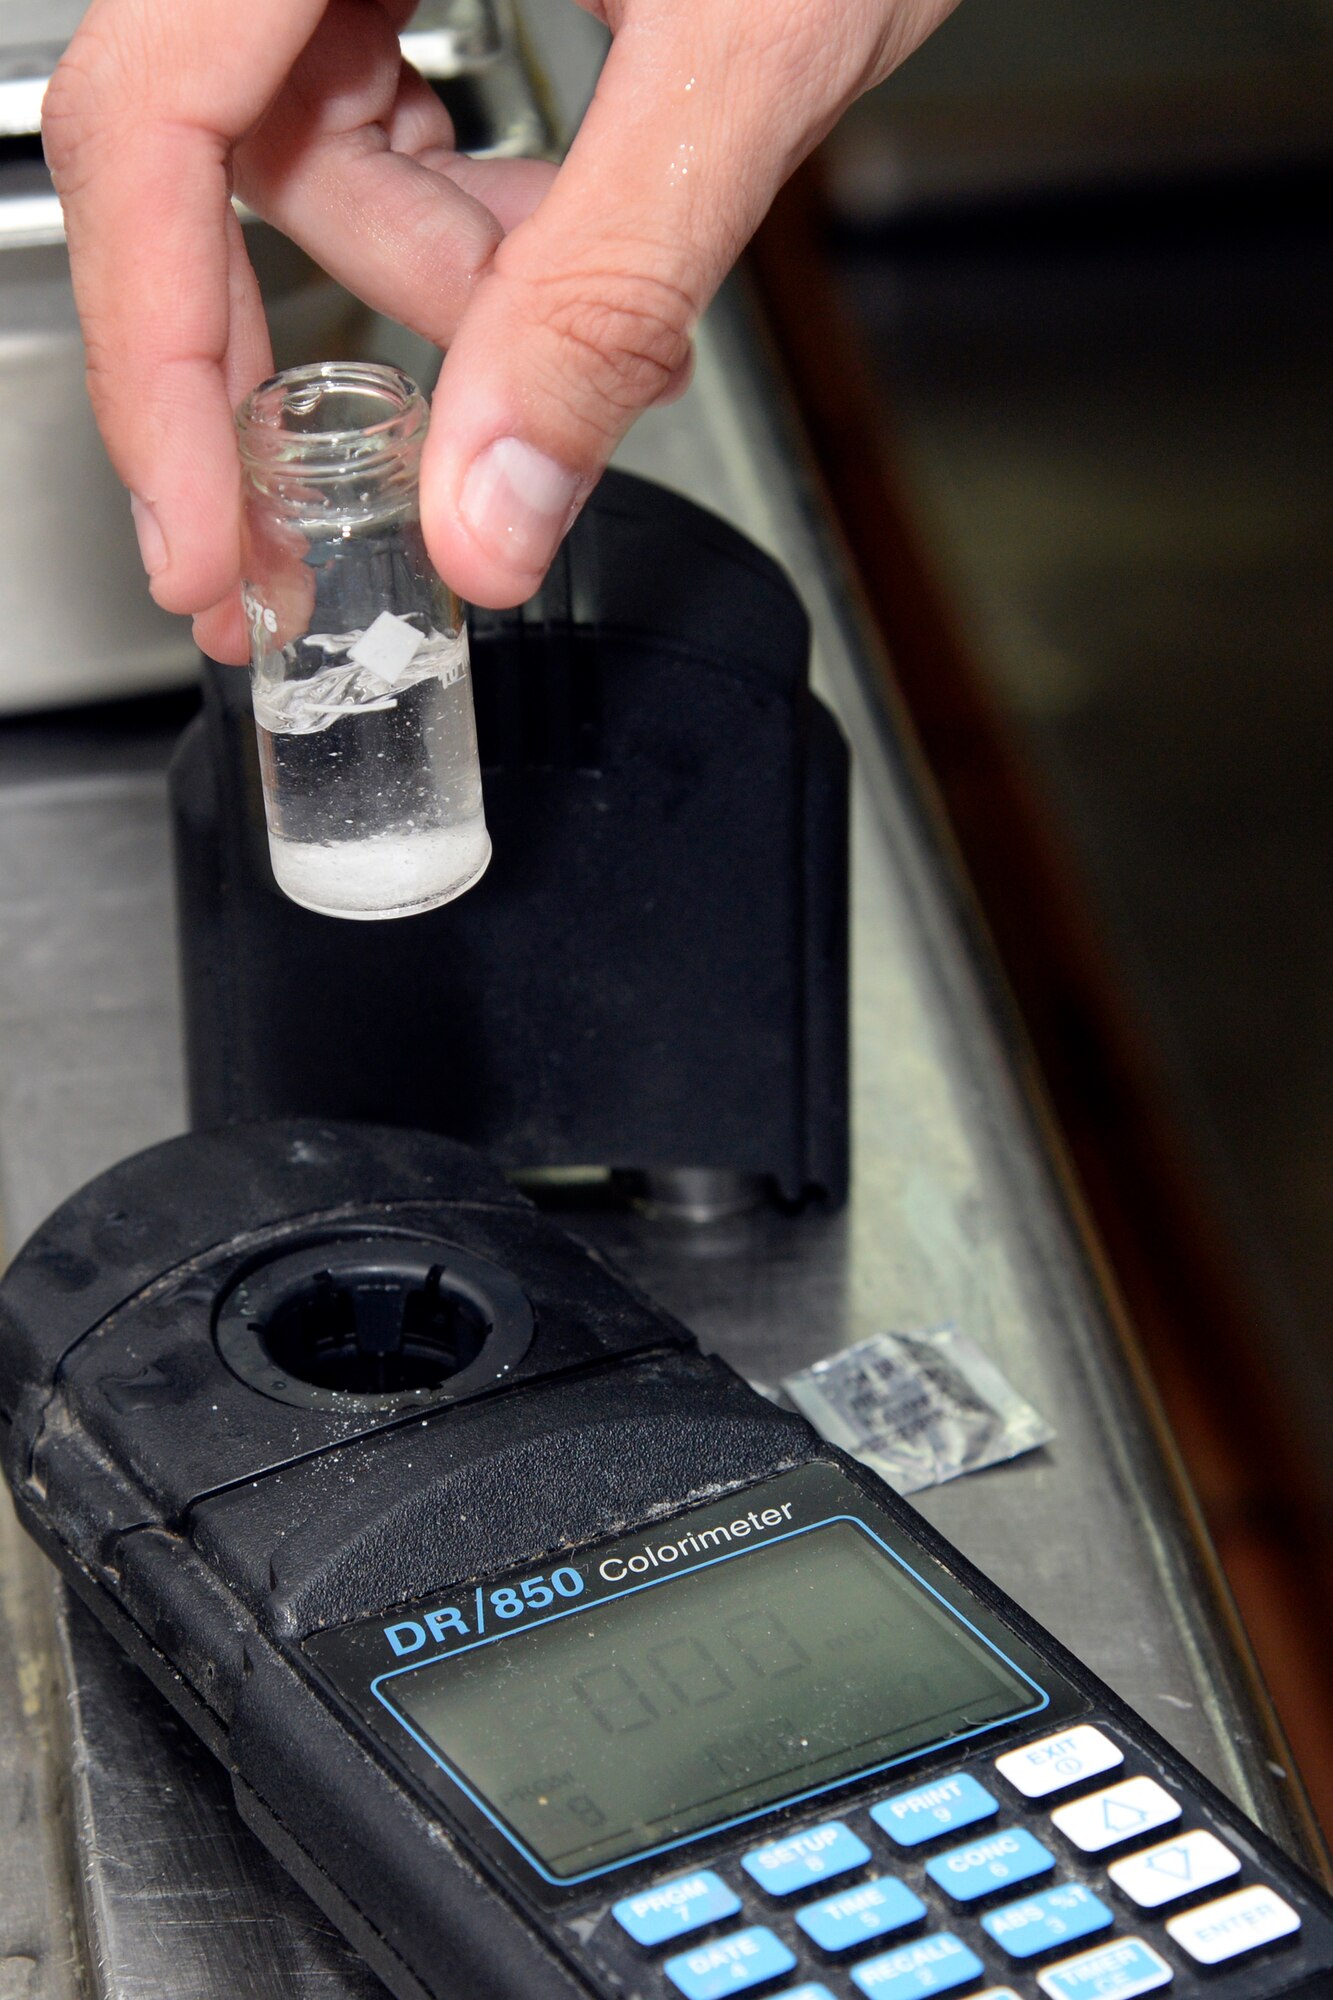 Staff Sgt. Dennis, bioenvironmental engineering technician, prepares a water sample to test the chlorine level using a Colorimeter at an undisclosed location in Southwest Asia Dec. 24, 2014. Water is tested to make sure the water is safe for consumption. Dennis is currently deployed from Joint Base San Antonio, Texas and is a native of San Antonio, Texas. (U.S. Air Force photo/Tech. Sgt. Marie Brown)